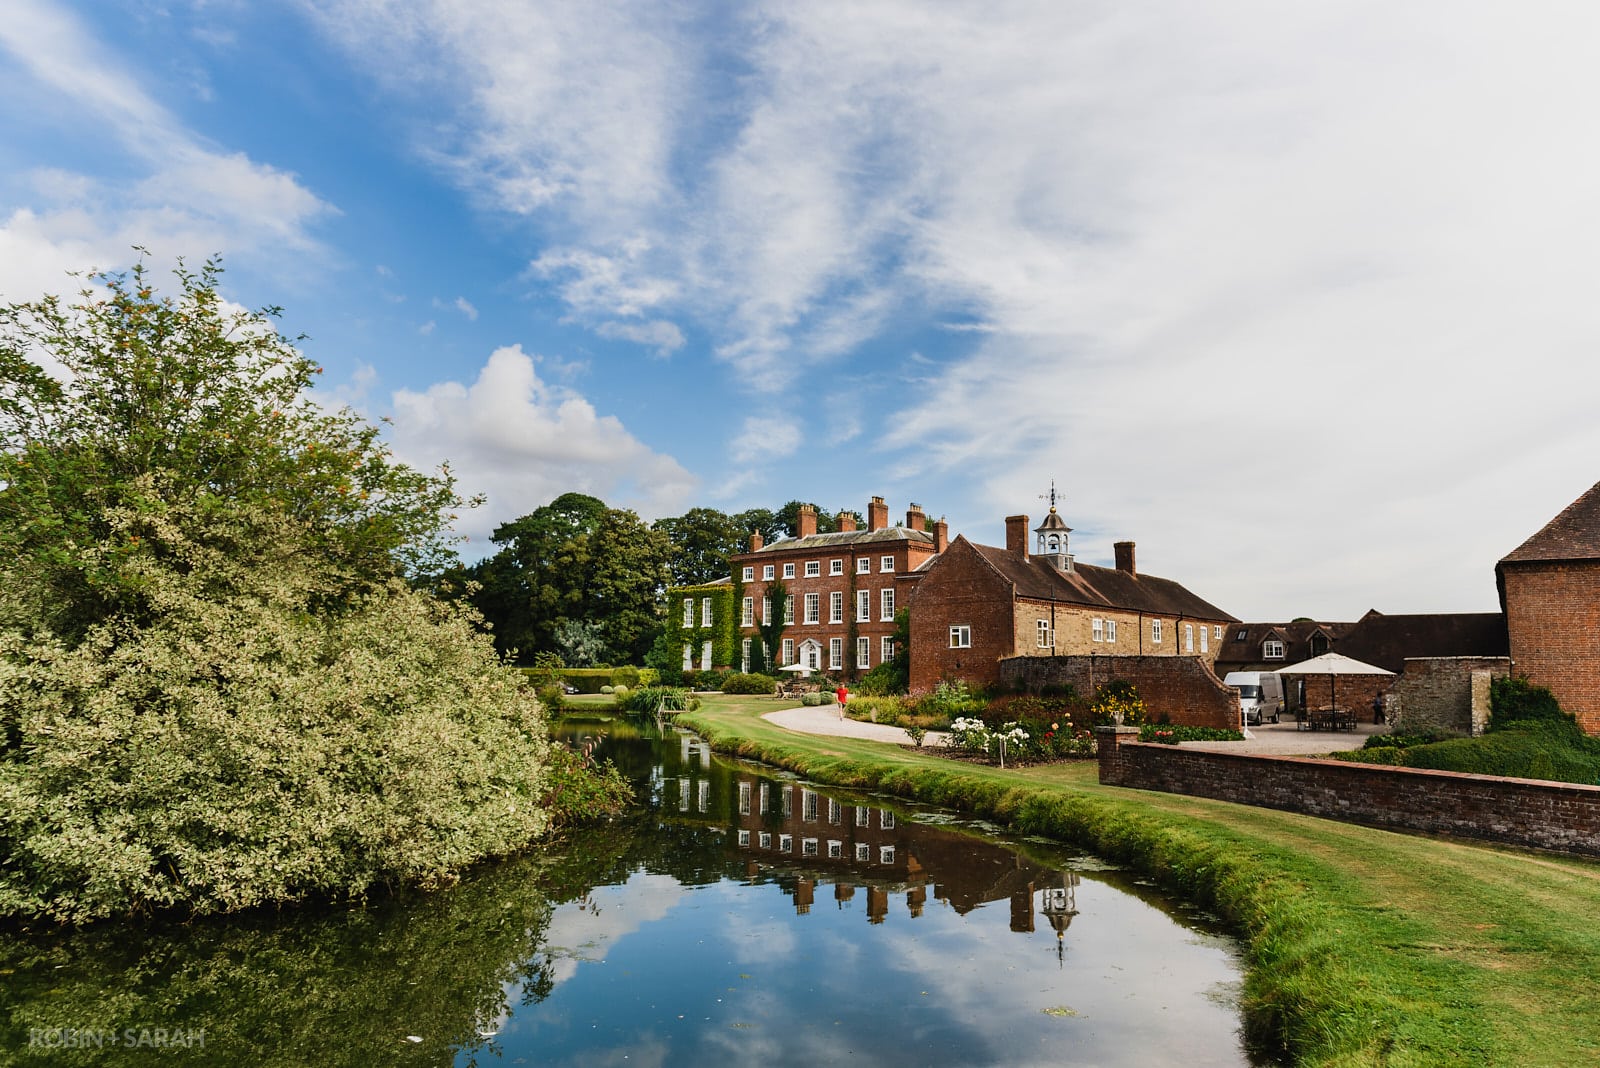 View of Delbury Hall wedding venue with beautiful pond and gardens